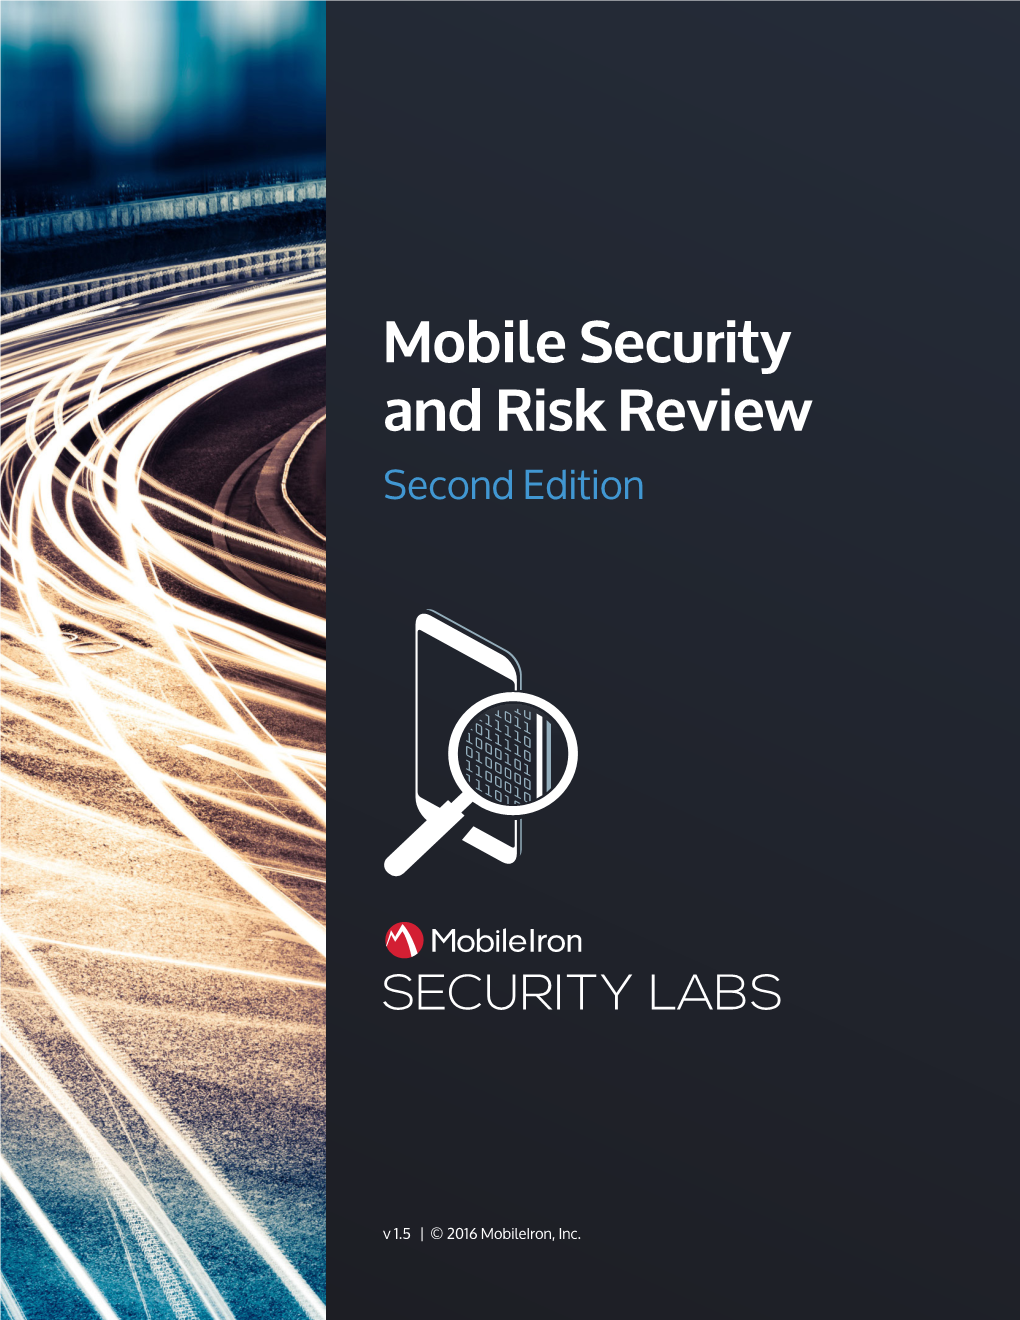 Mobile Security and Risk Review Second Edition